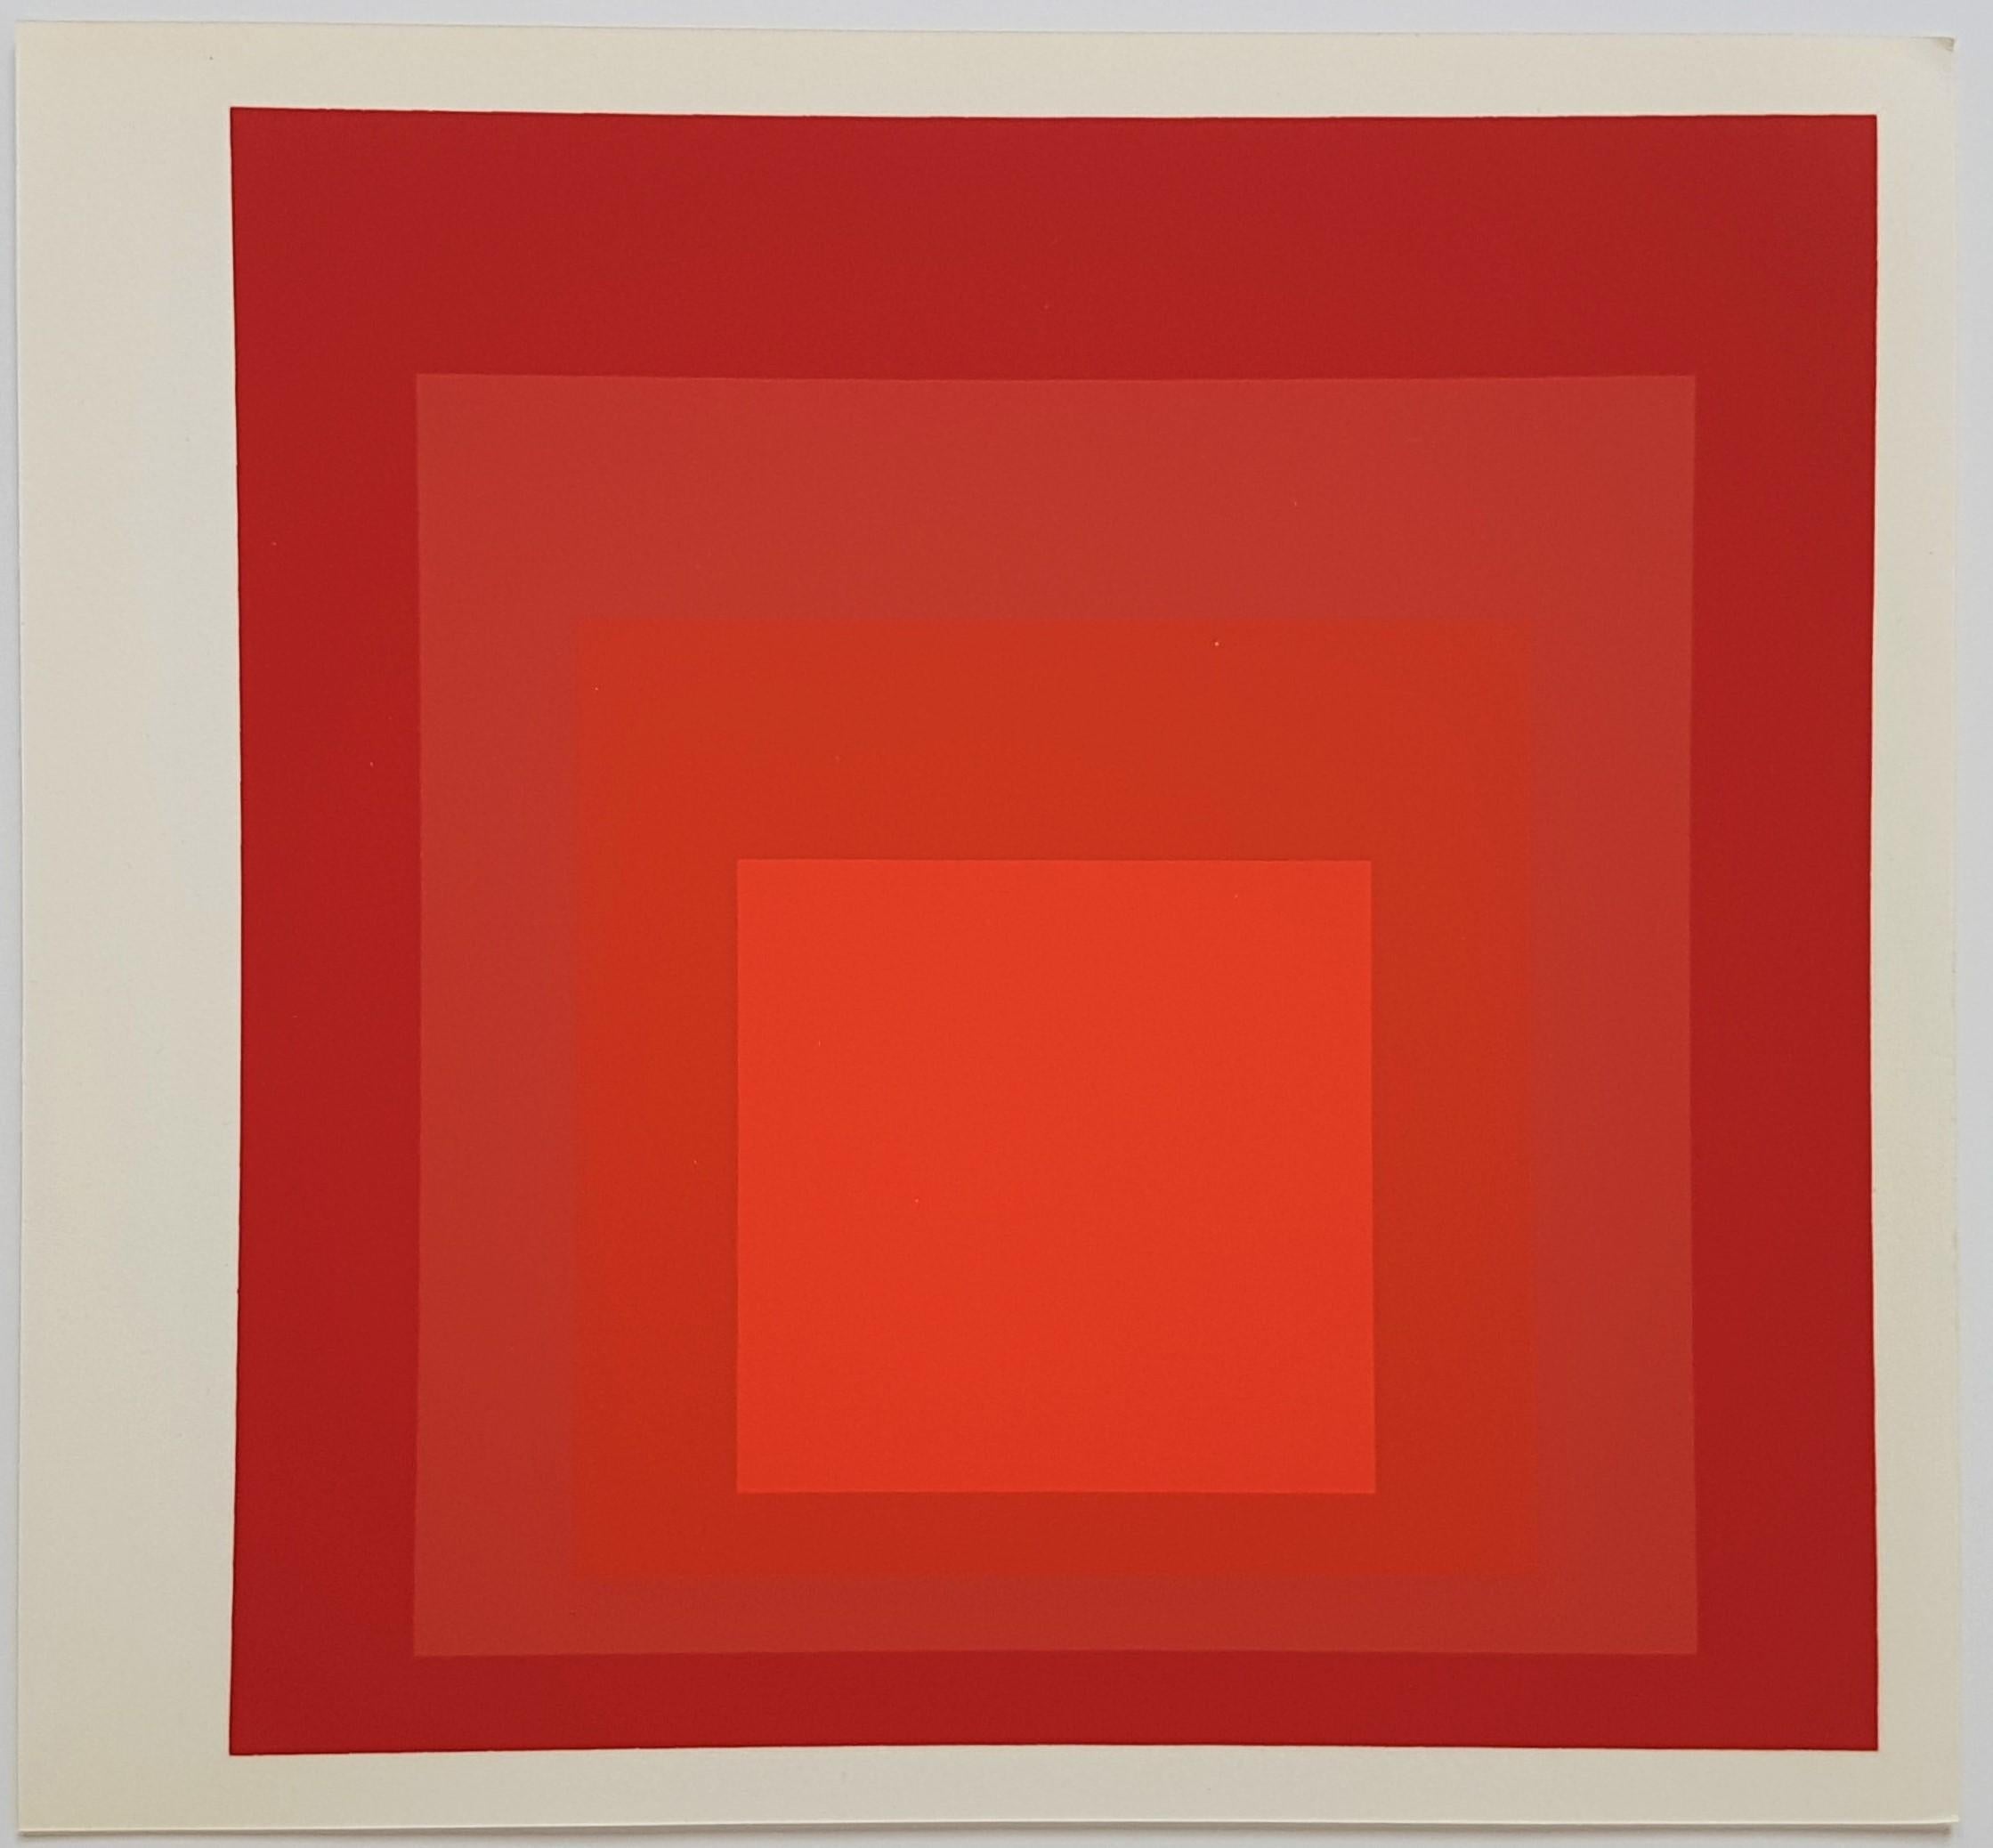 (after) Josef Albers Abstract Print - Homage to the Square: R-III A-4 (from "Albers")